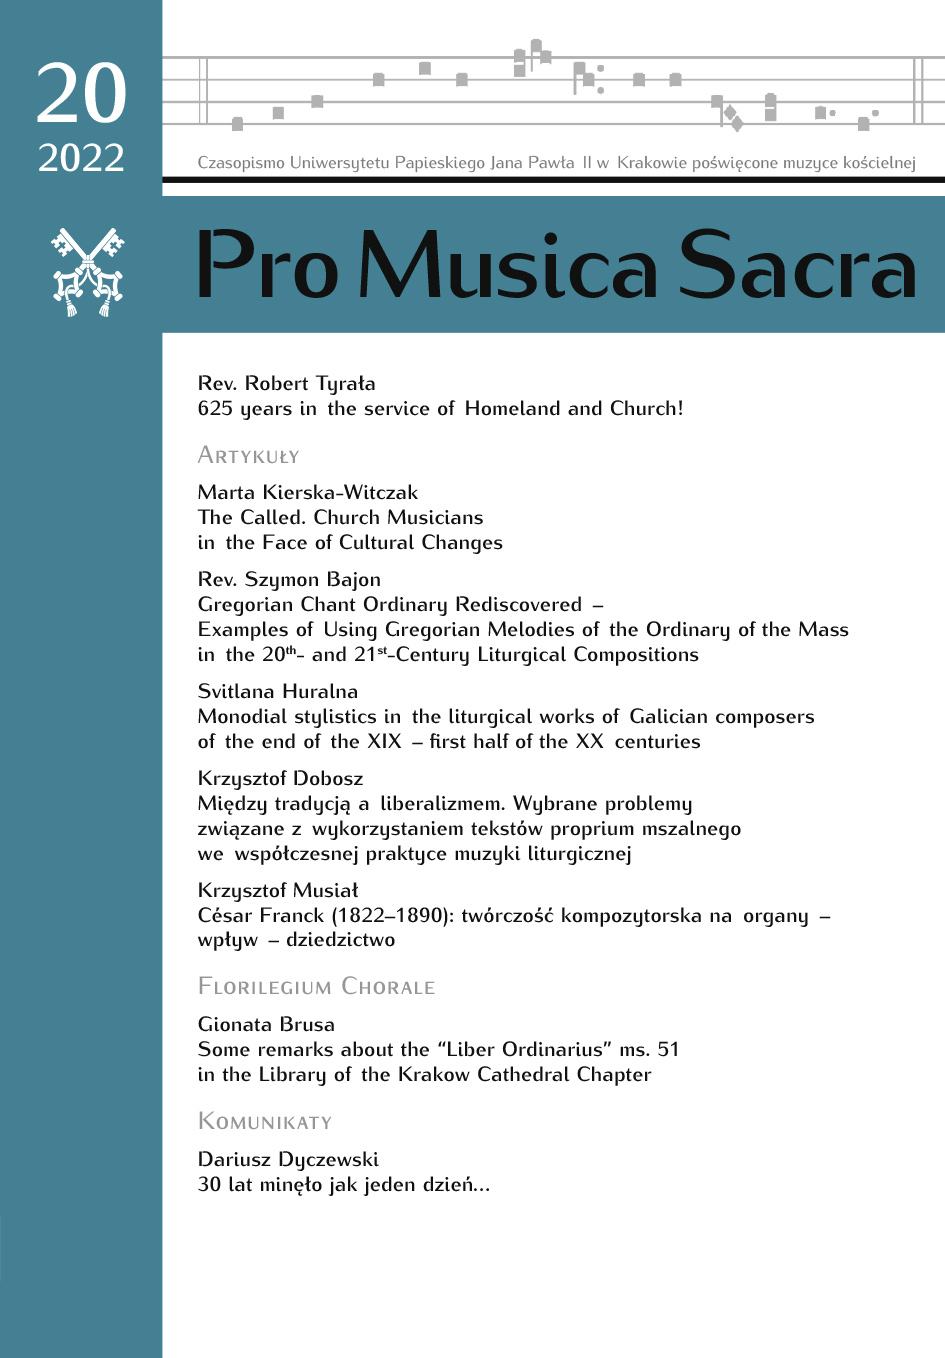 Between Tradition and Liberalism. Selected Issues of Using the Texts of the Mass “Proprium” in the Contemporary Practice of Liturgical Music Cover Image